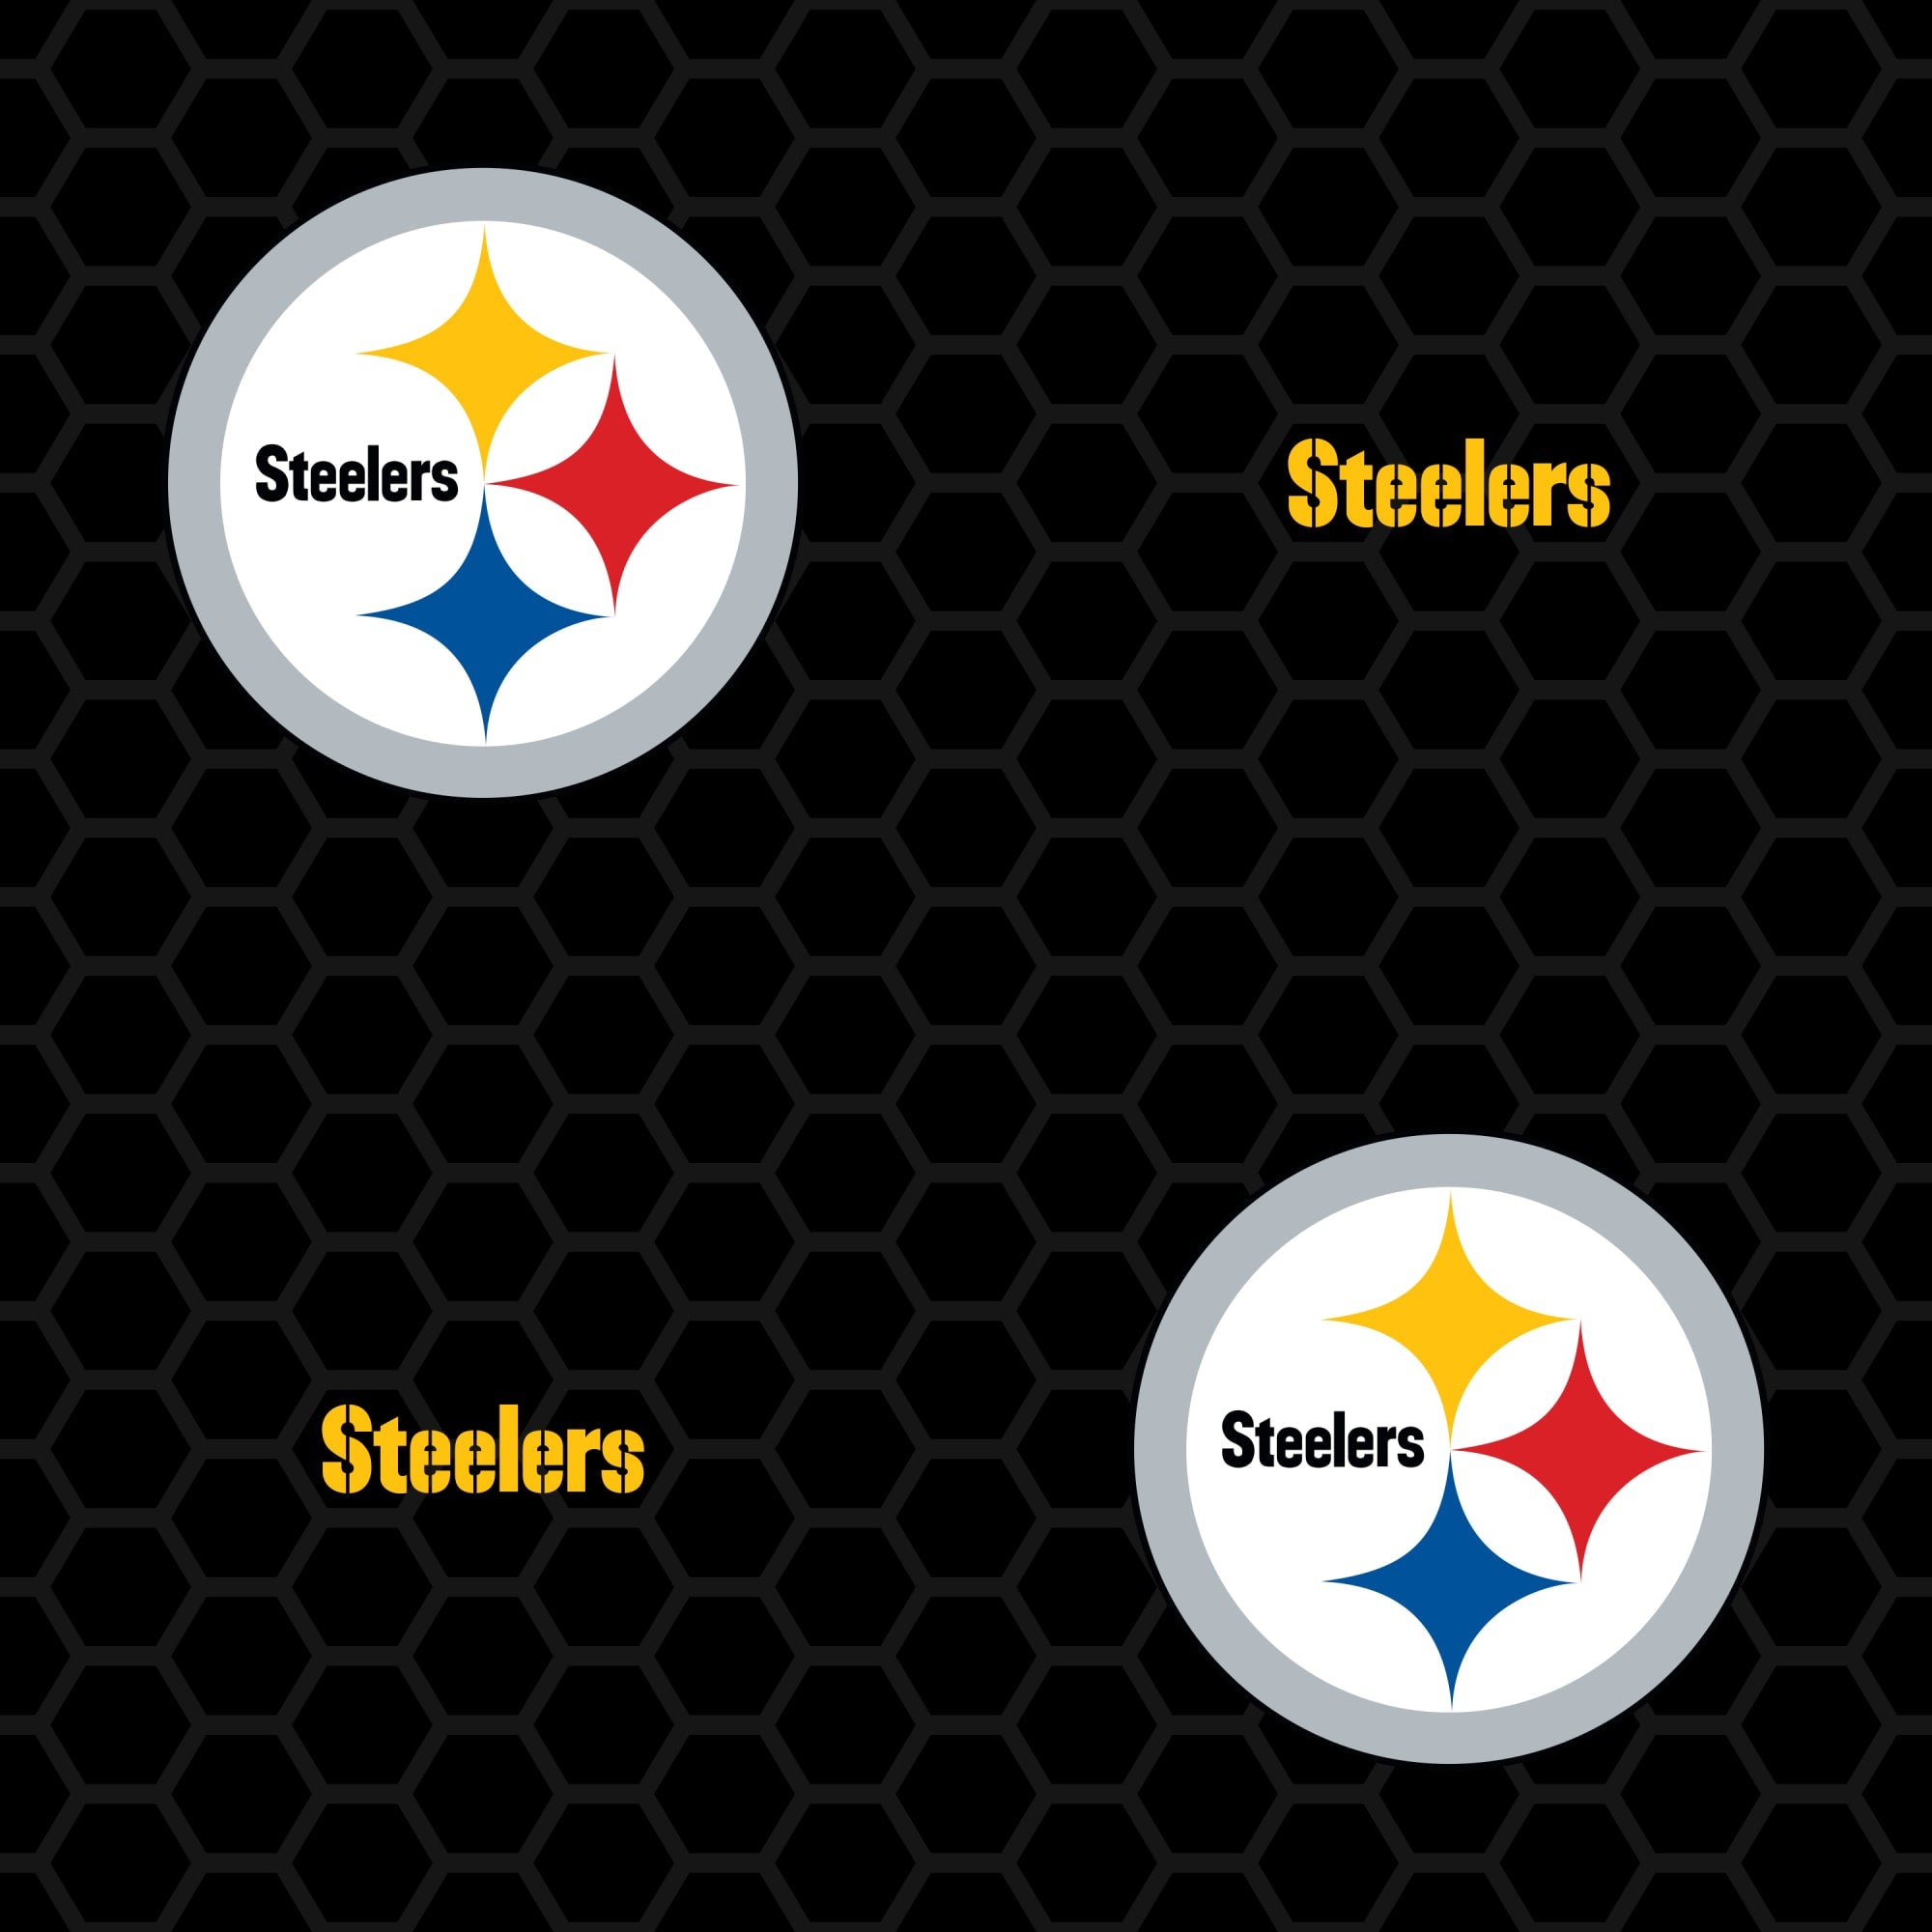 2023 Pittsburgh Steelers wallpaper  Pro Sports Backgrounds